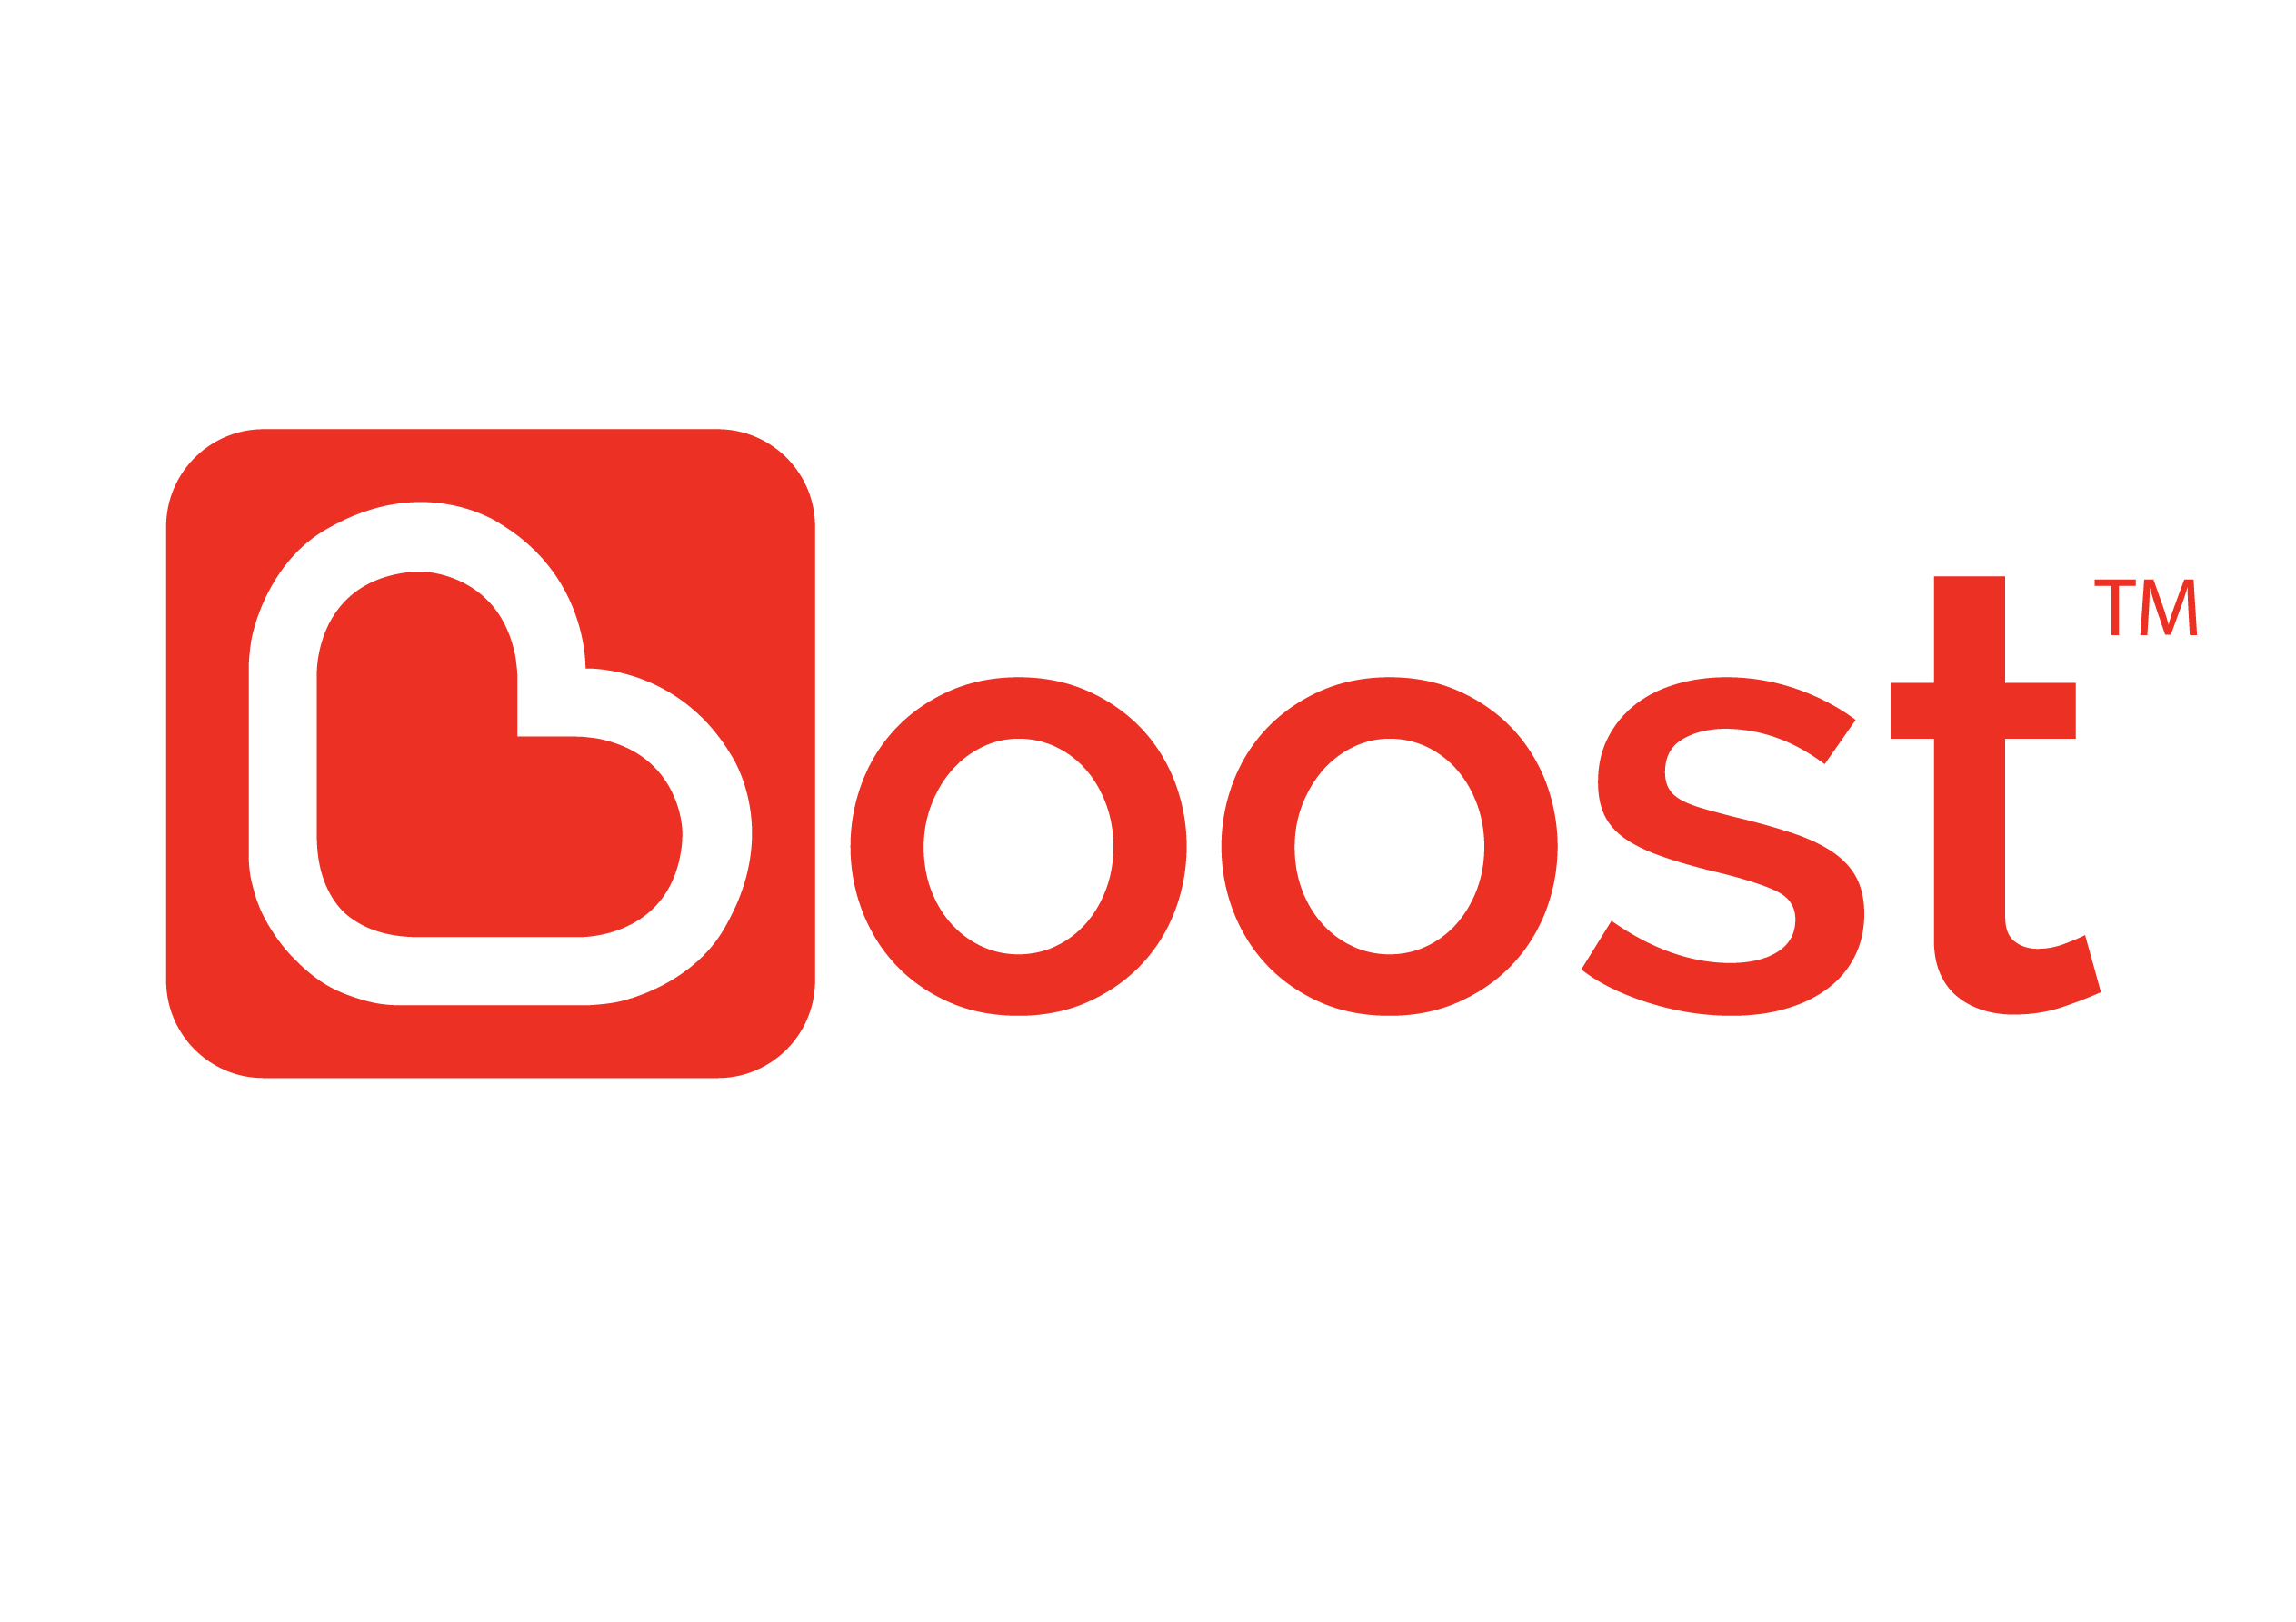 boost-logo - Events by Star Media Group